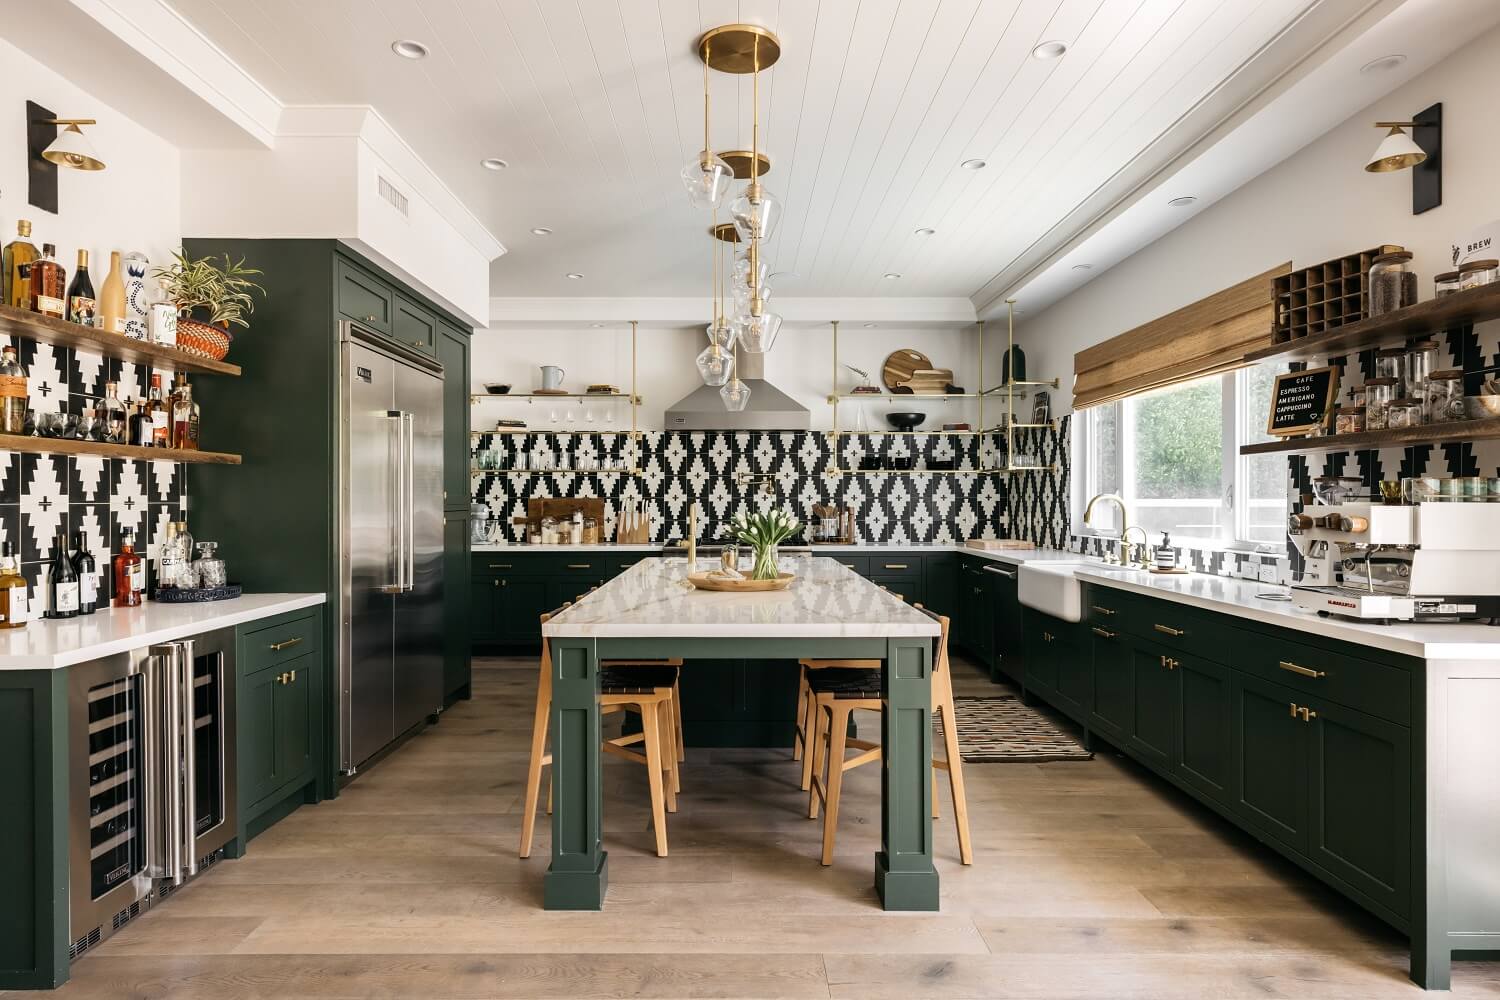 green-kitchen-island-geometric-tiles-open-shelves-daveed-diggs-emmy-raver-lampman-nordroom